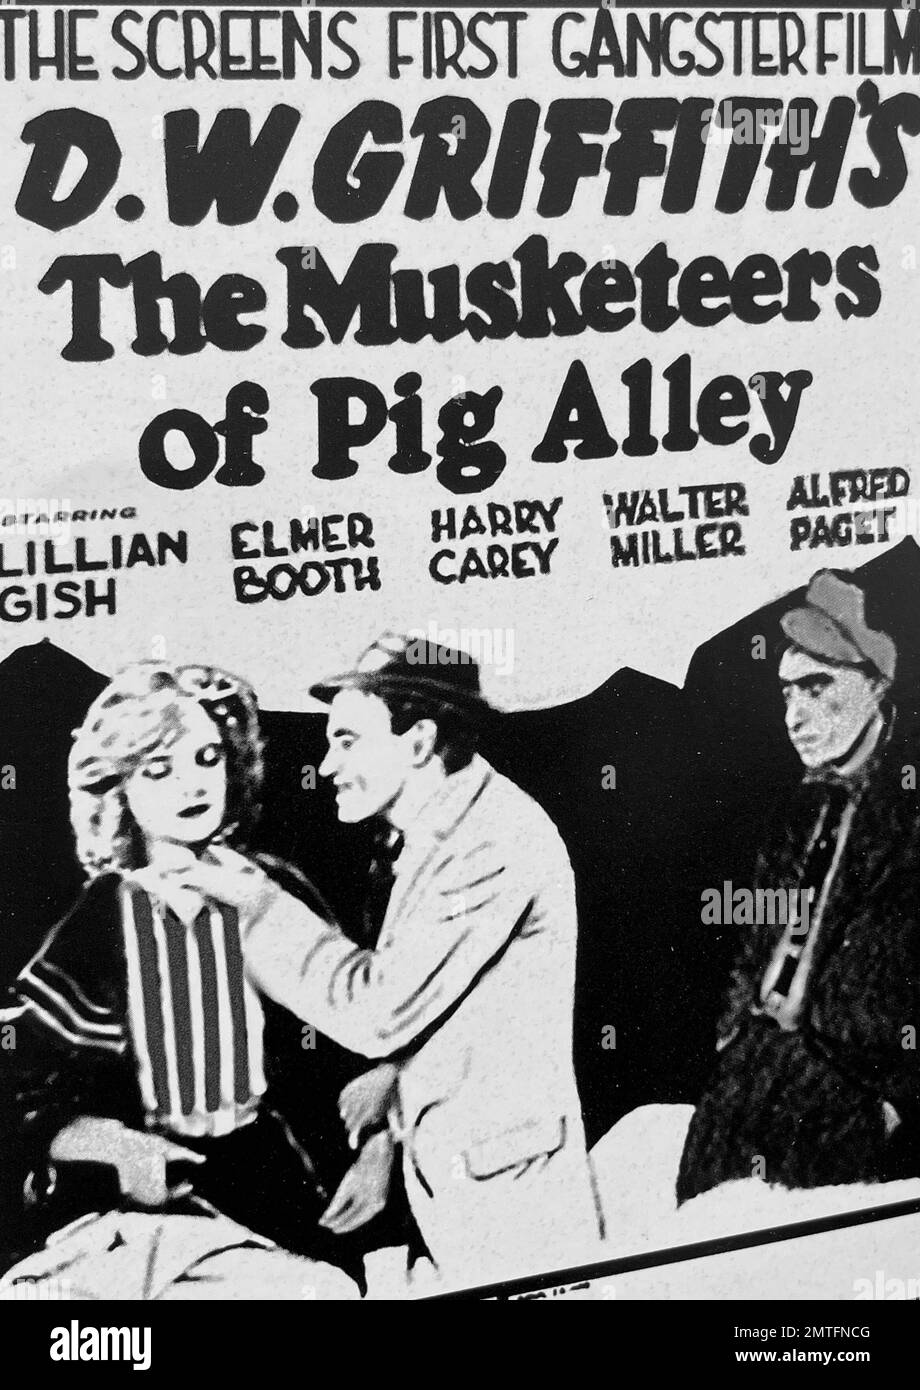 THE MUSKETEERS OF PIG ALLEY 1912 silent GFC film written and directed by D.W.Griffith Stock Photo